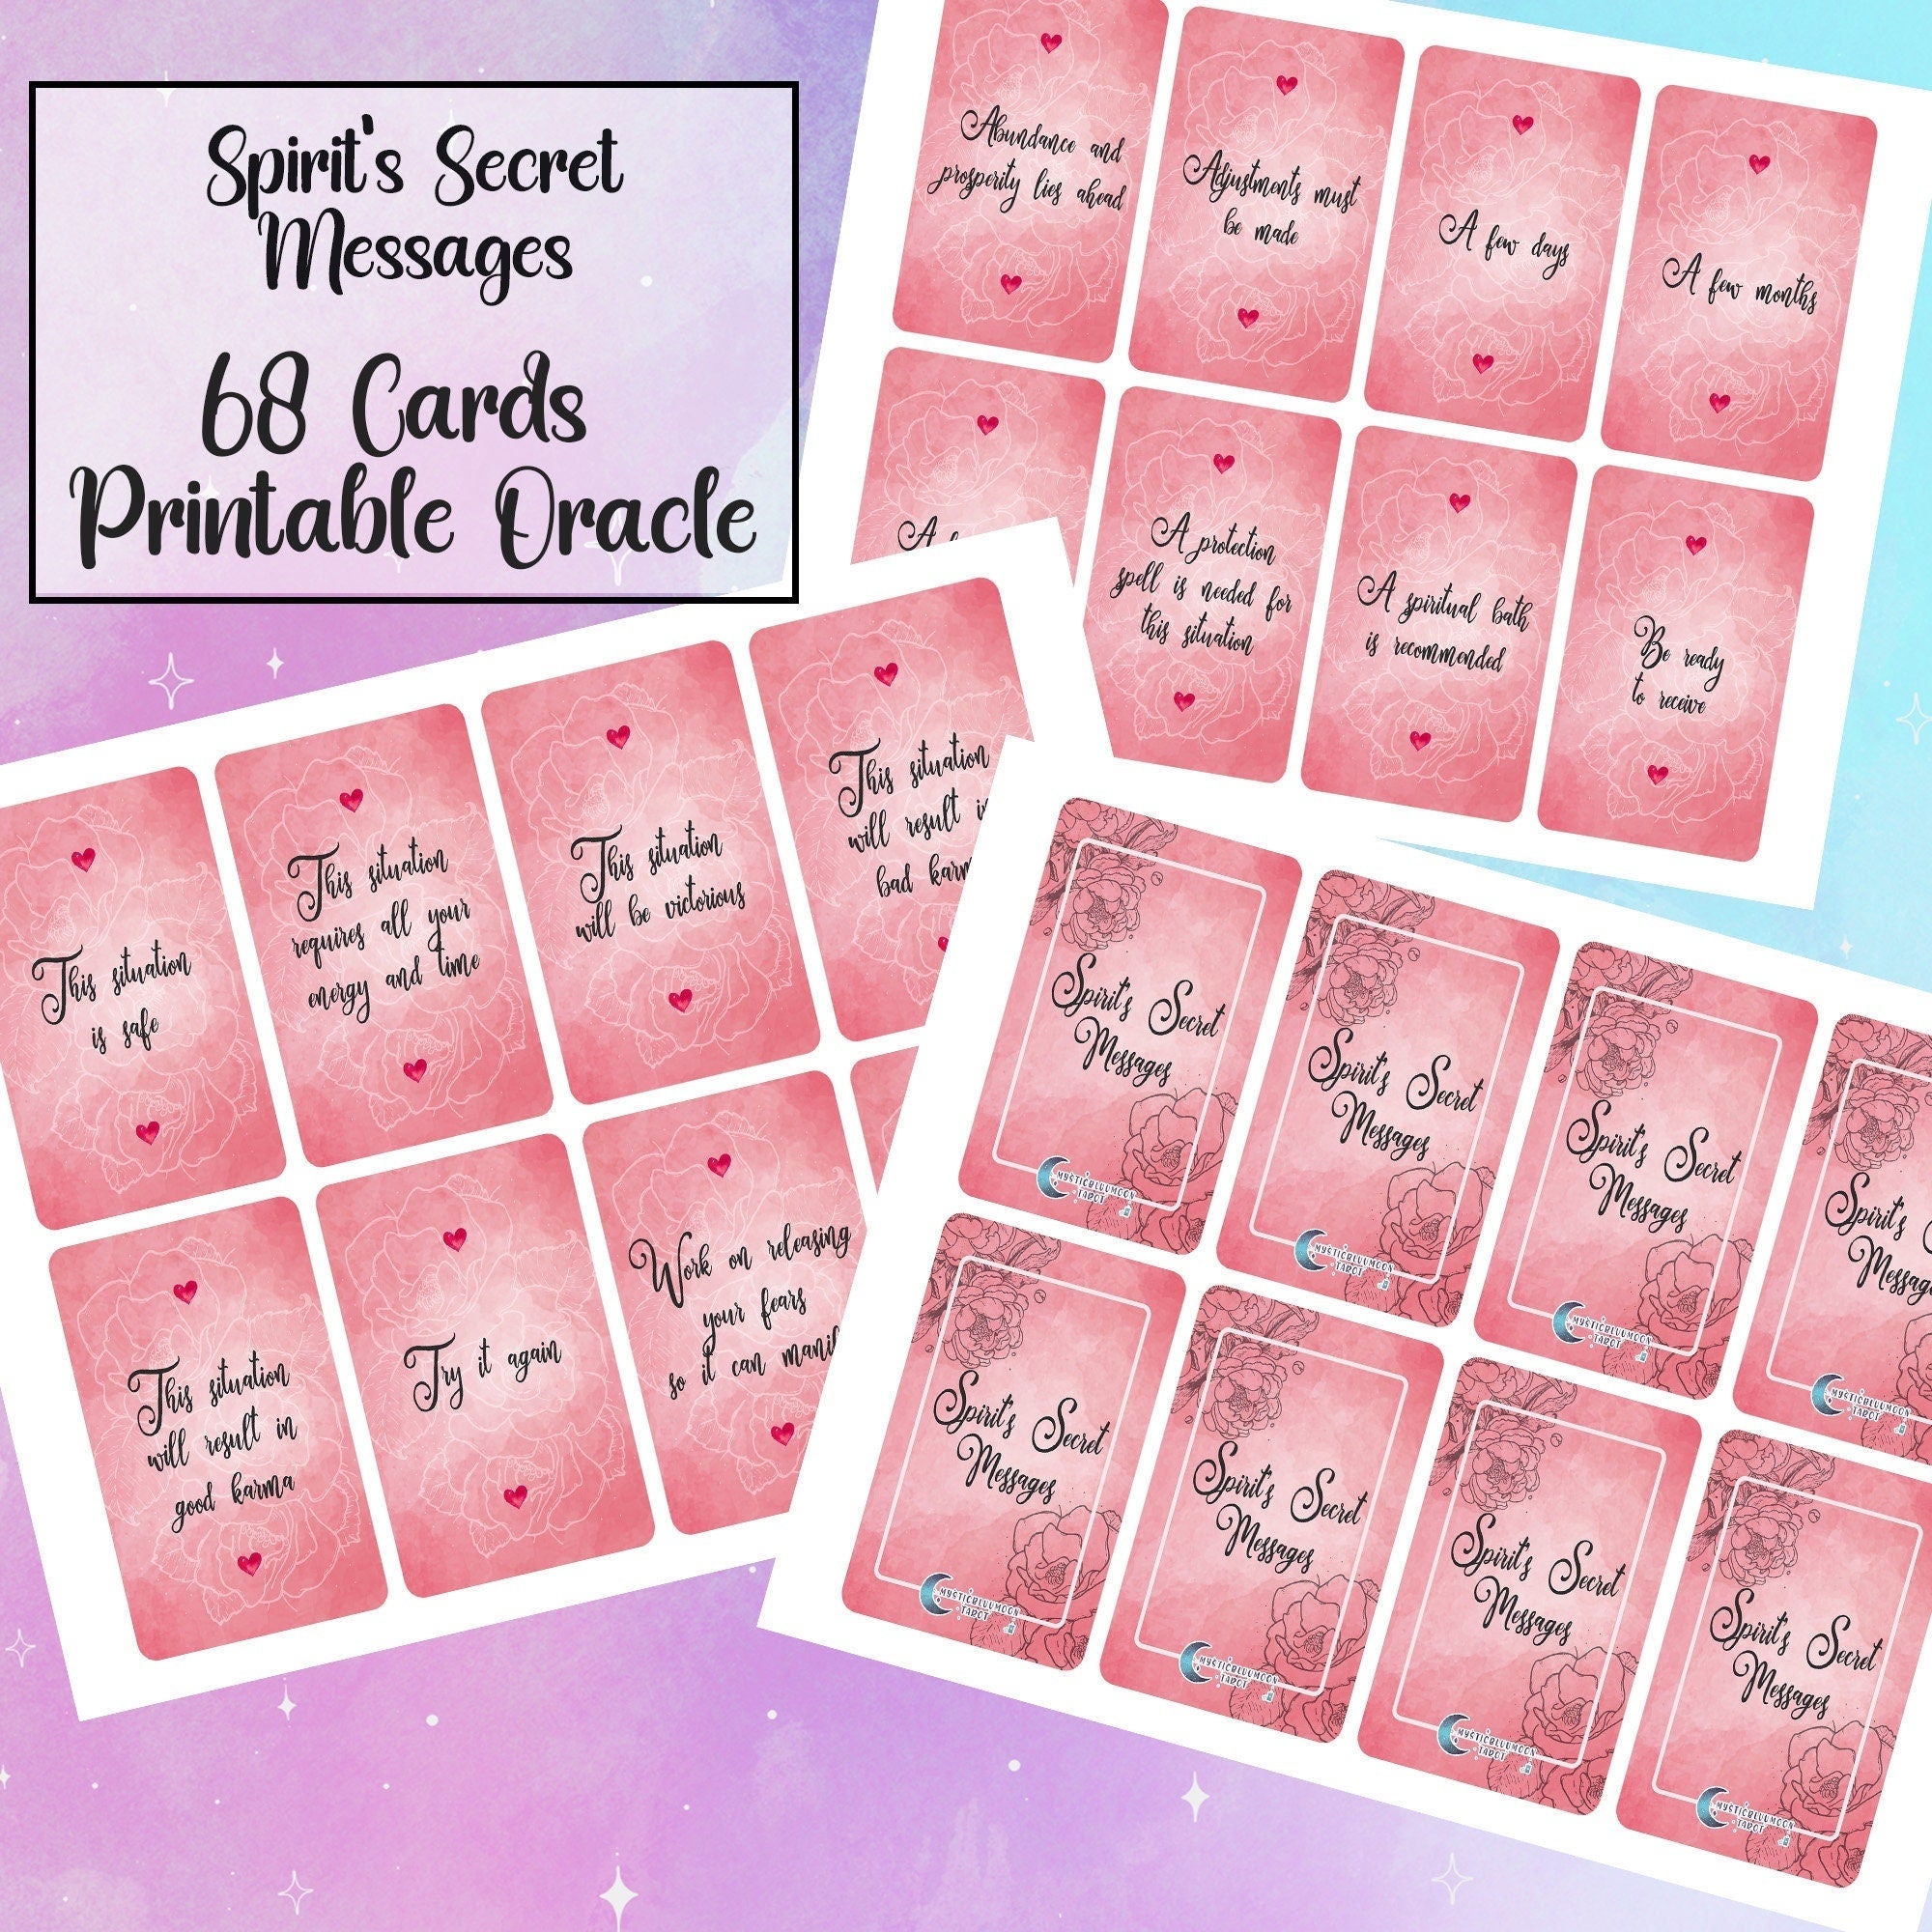 Spirit's Secret Messages Printable Oracle Deck - Digital File 68 Cards - Twin Flame Love Oracle - Tarot - INSTANT DOWNLOAD - MysticBluuMoonTarot